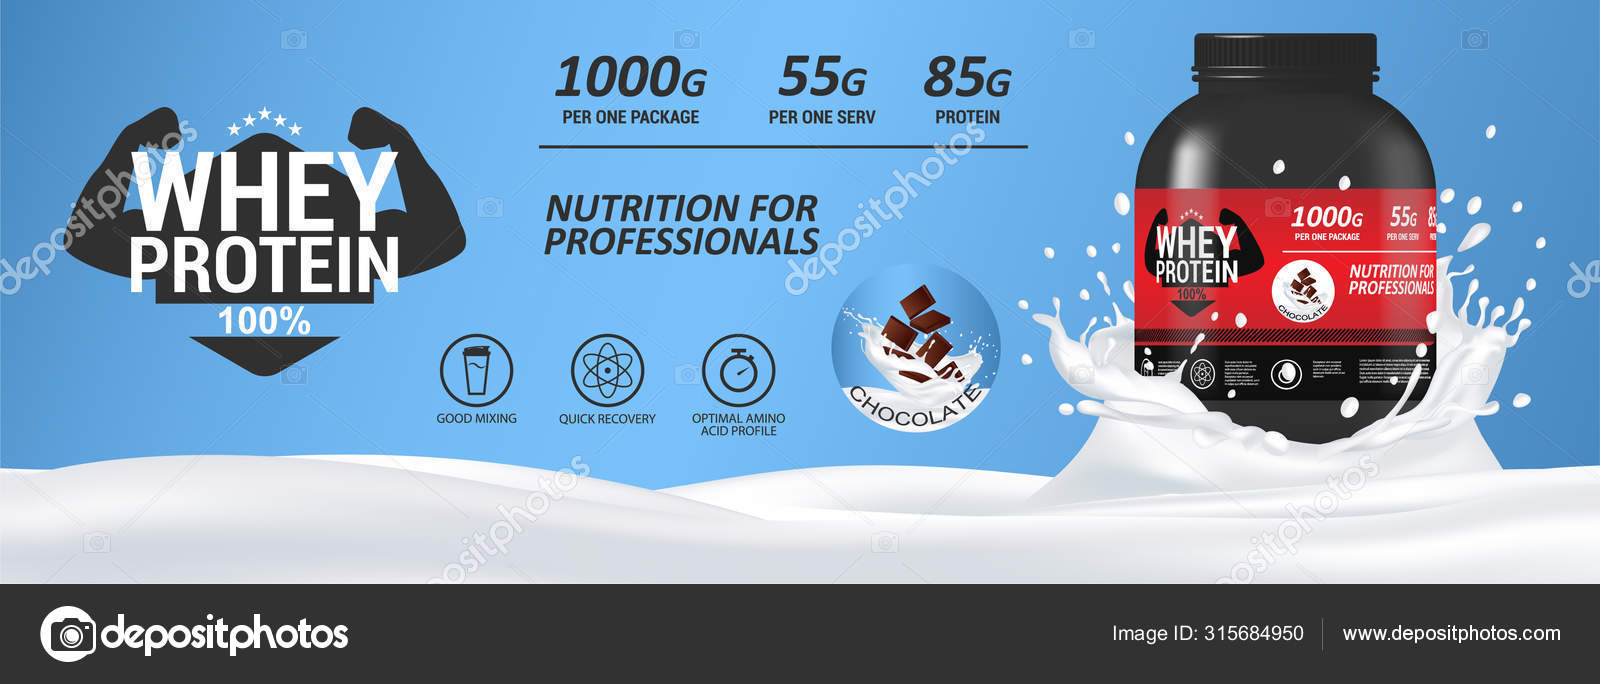 Download Sport Nutrition Whey Protein Mockup Banner Vector Image By C Sergeybitos Mail Ru Vector Stock 315684950